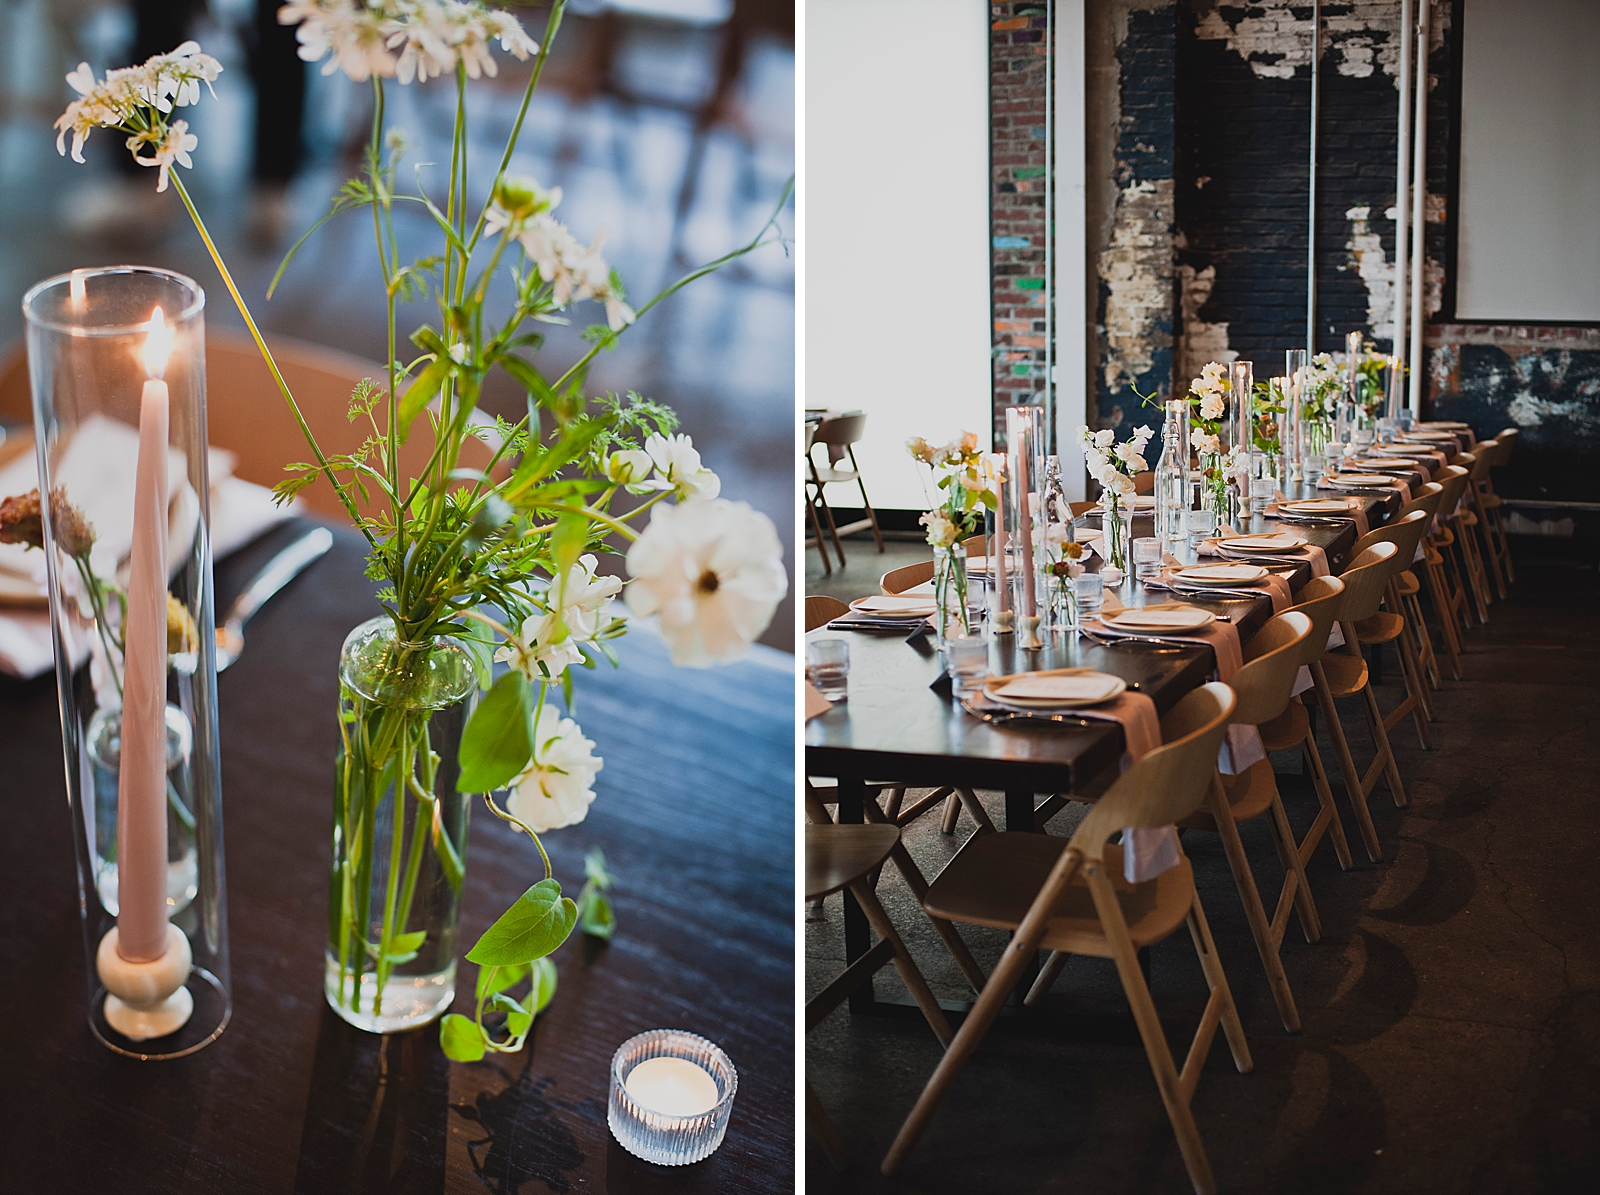 Left photo: Close up shot of a flower arrangement and candle on a reception table. 
Right photo: Shot of a fully set reception table. 